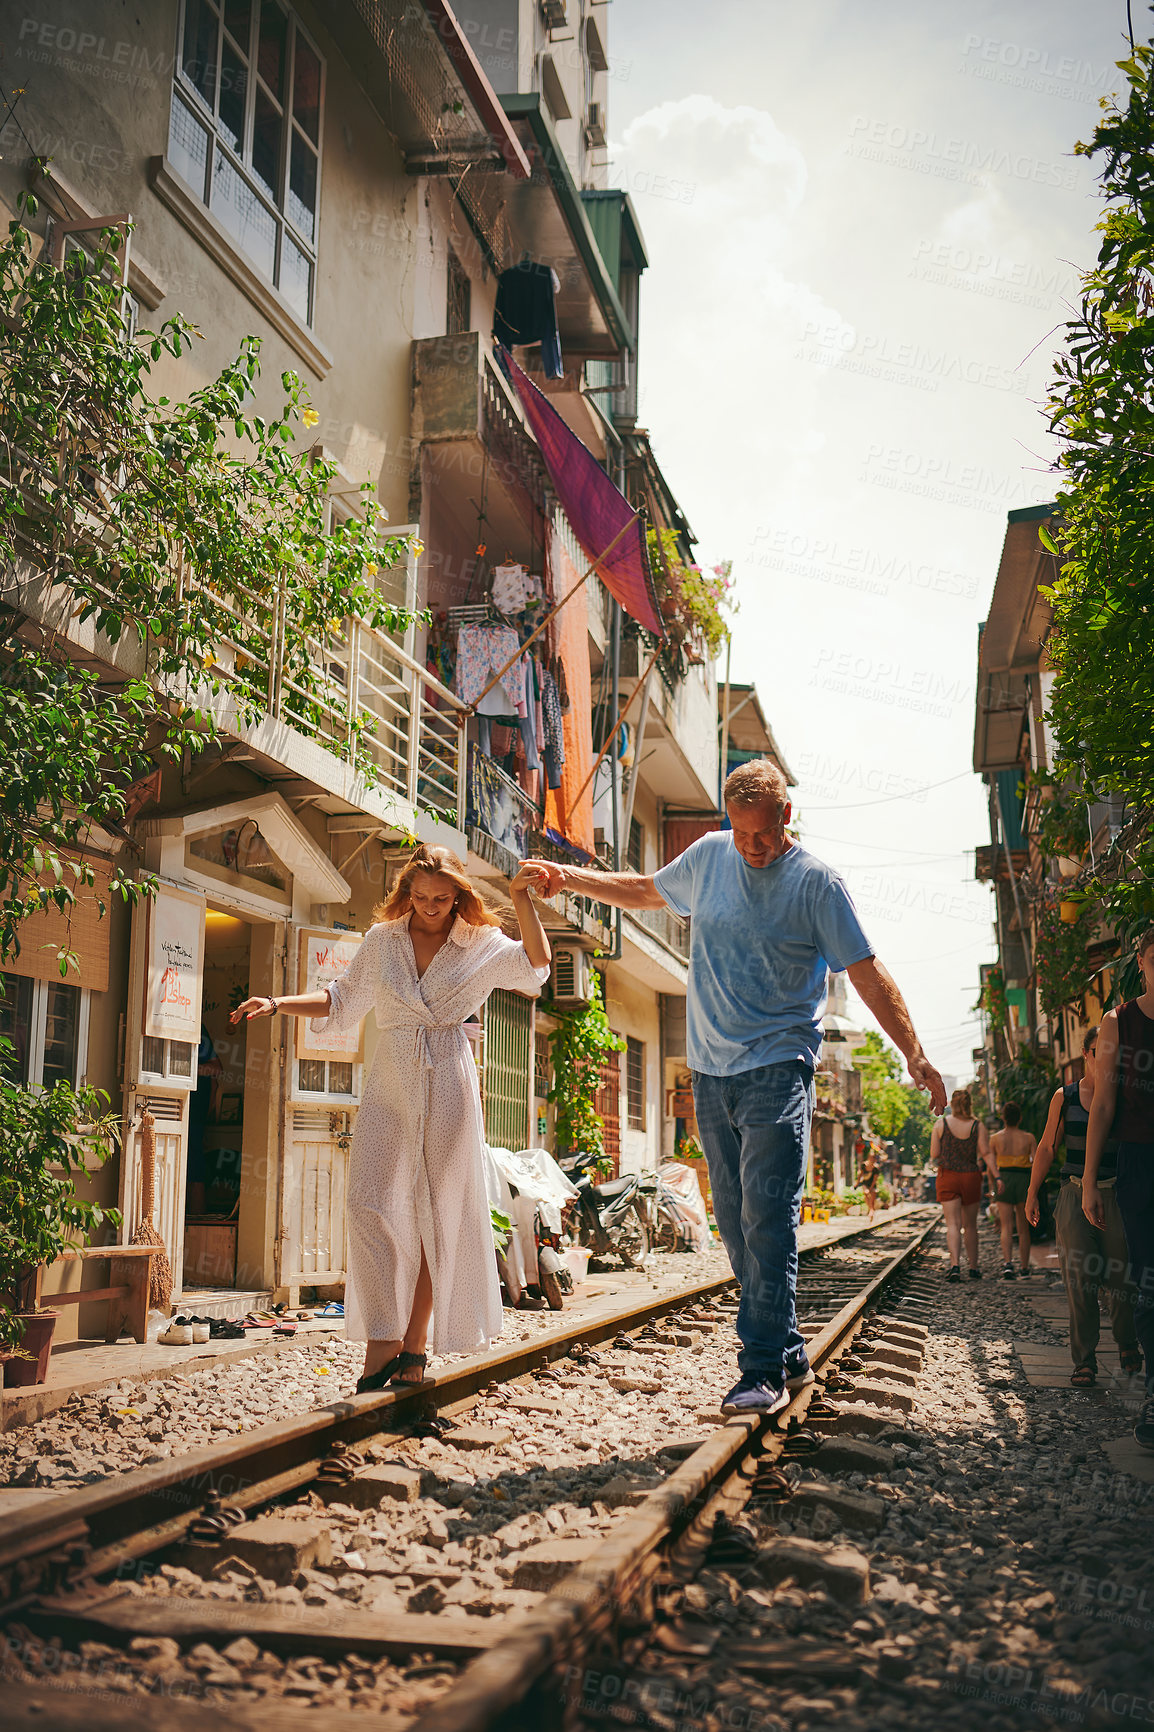 Buy stock photo Shot of a happy couple sharing a romantic moment on the train tracks in the streets of Vietnam